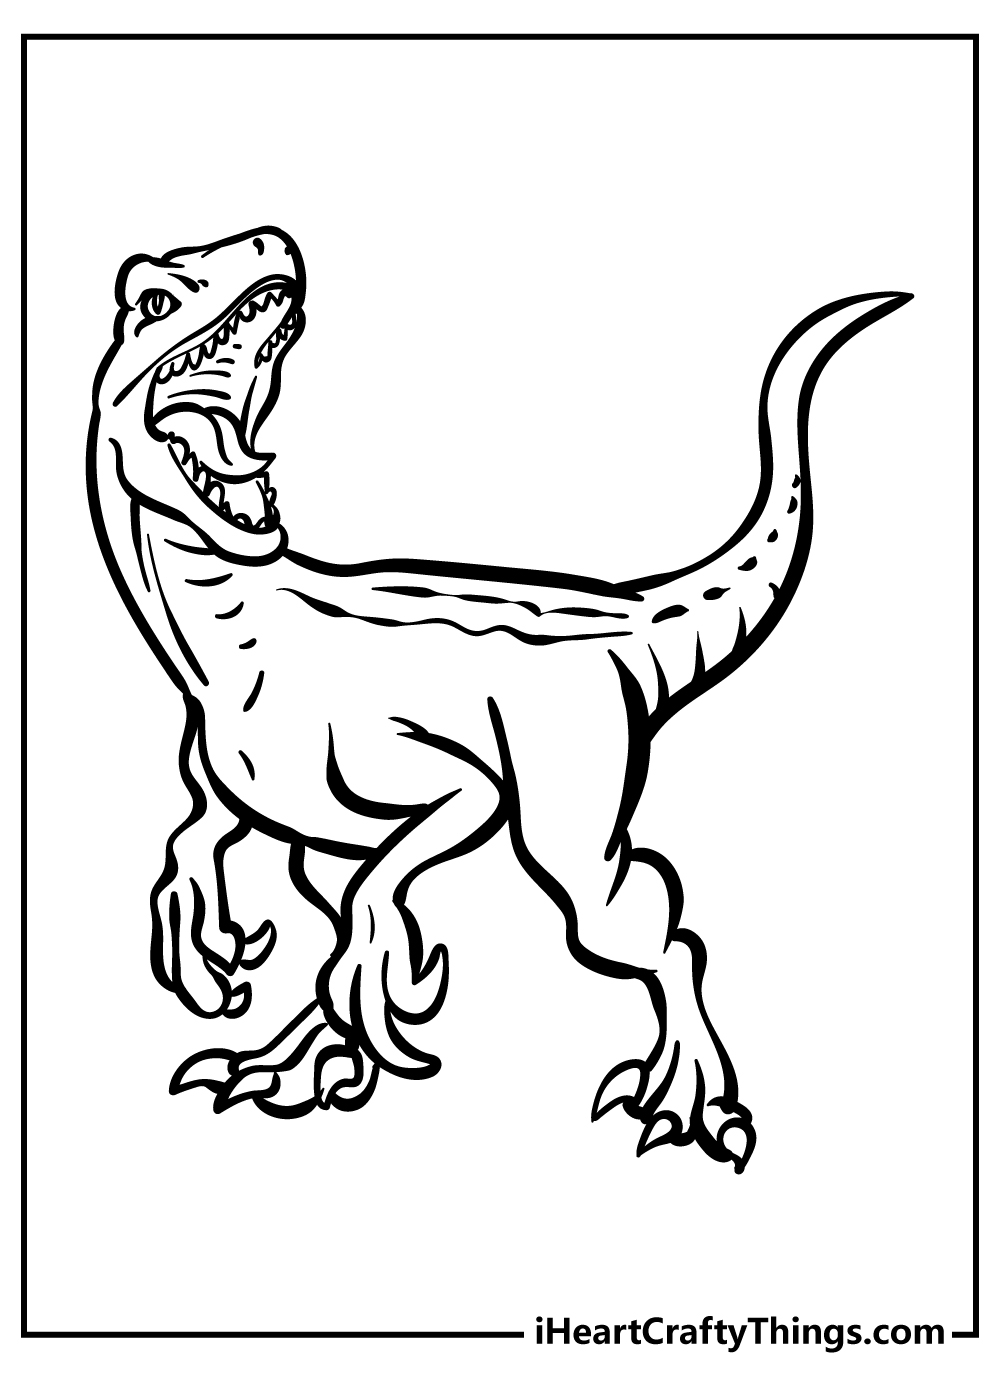 Printable Jurassic World Coloring Pages Updated 20